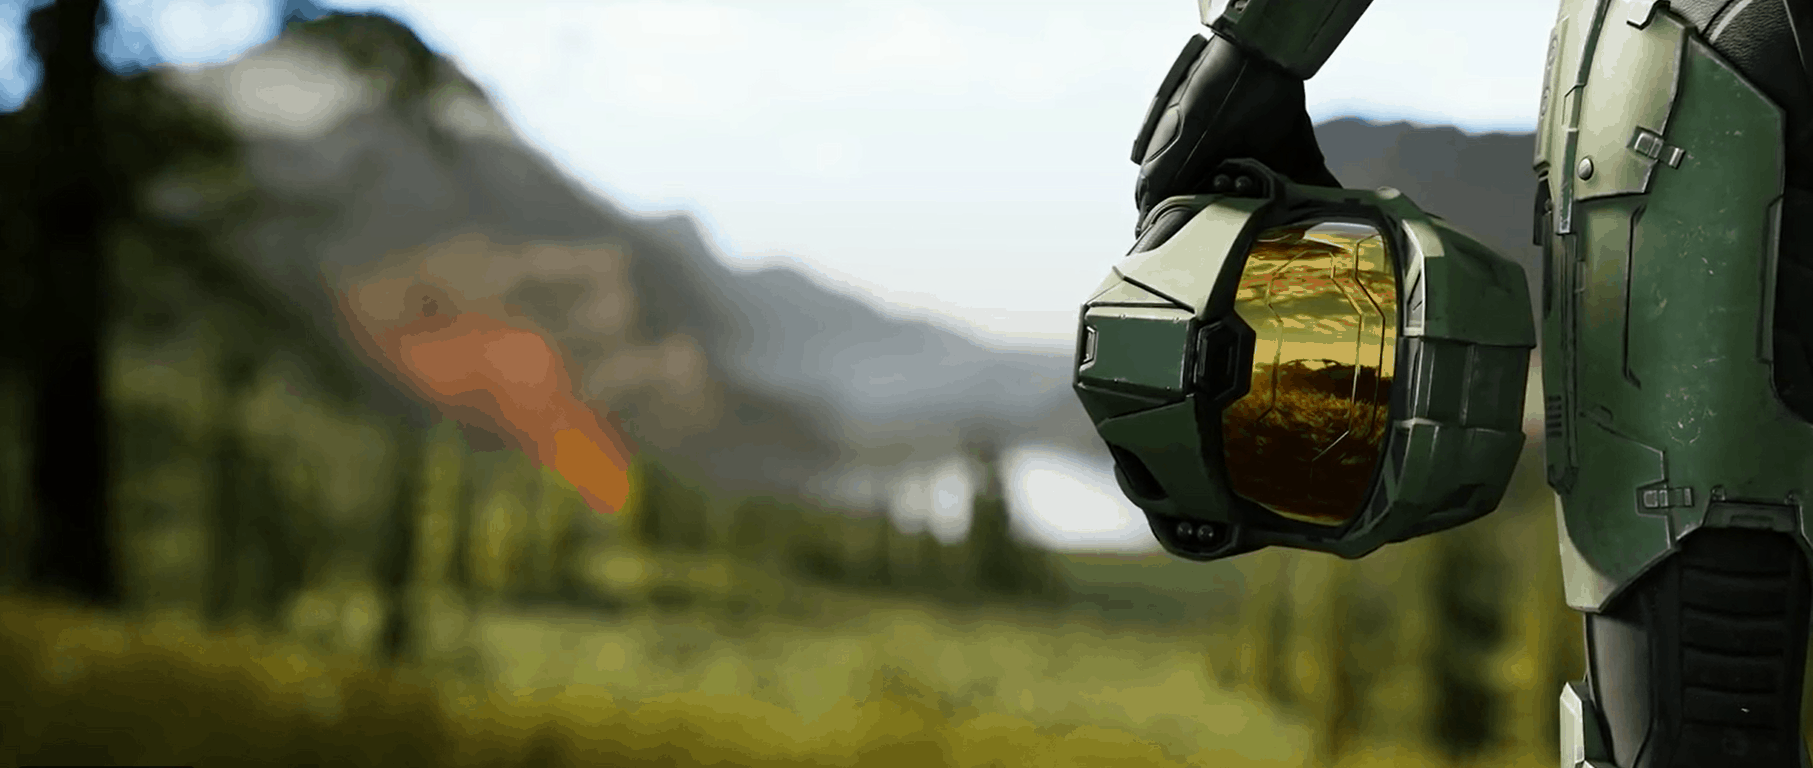 Halo: Infinite being built with Slipspace, Microsoft's new gaming engine - OnMSFT.com - June 11, 2018